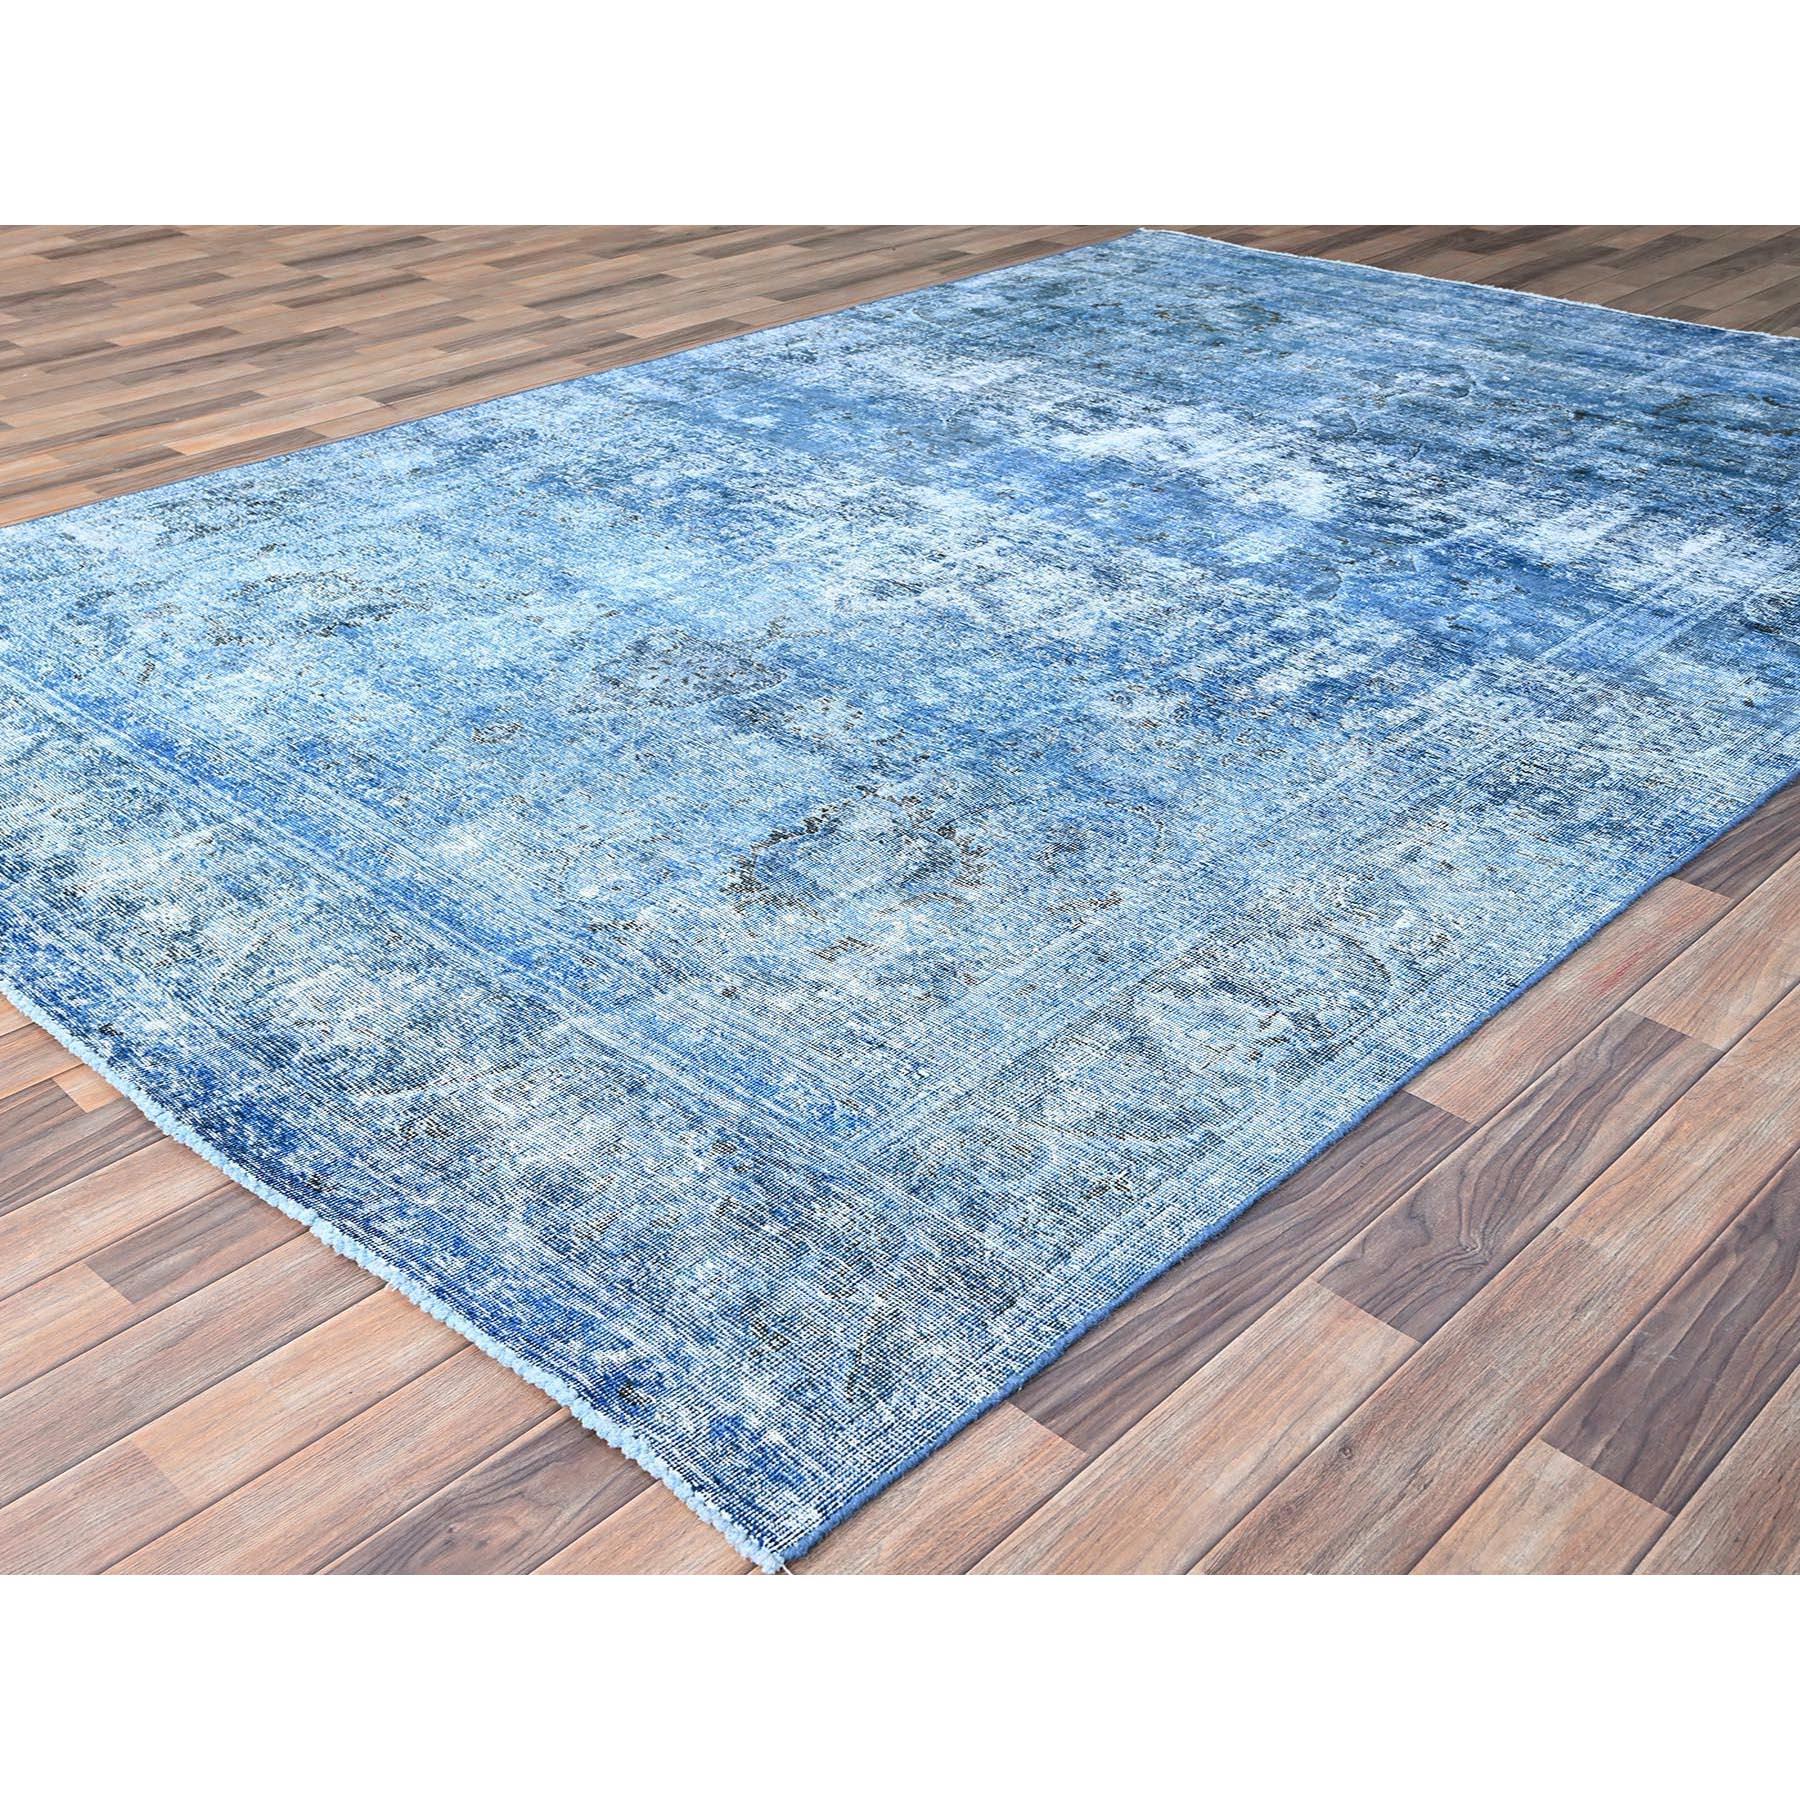 Blue Hand Knotted Clean Evenly Worn Vibrant Wool Overdyed Old Persian Tabriz Rug In Excellent Condition For Sale In Carlstadt, NJ